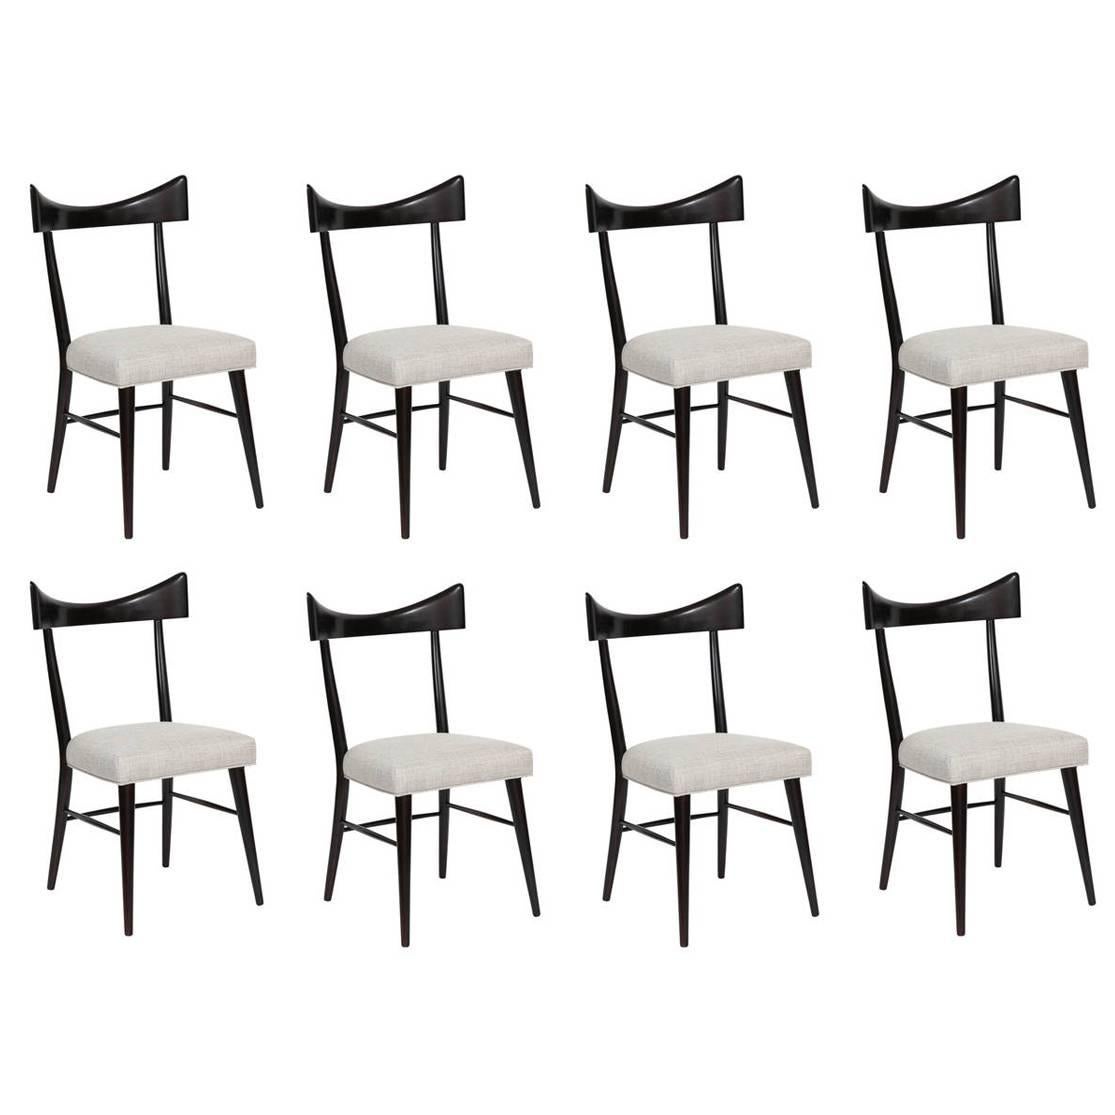 Paul McCobb Planner Group 8 Dining Chairs